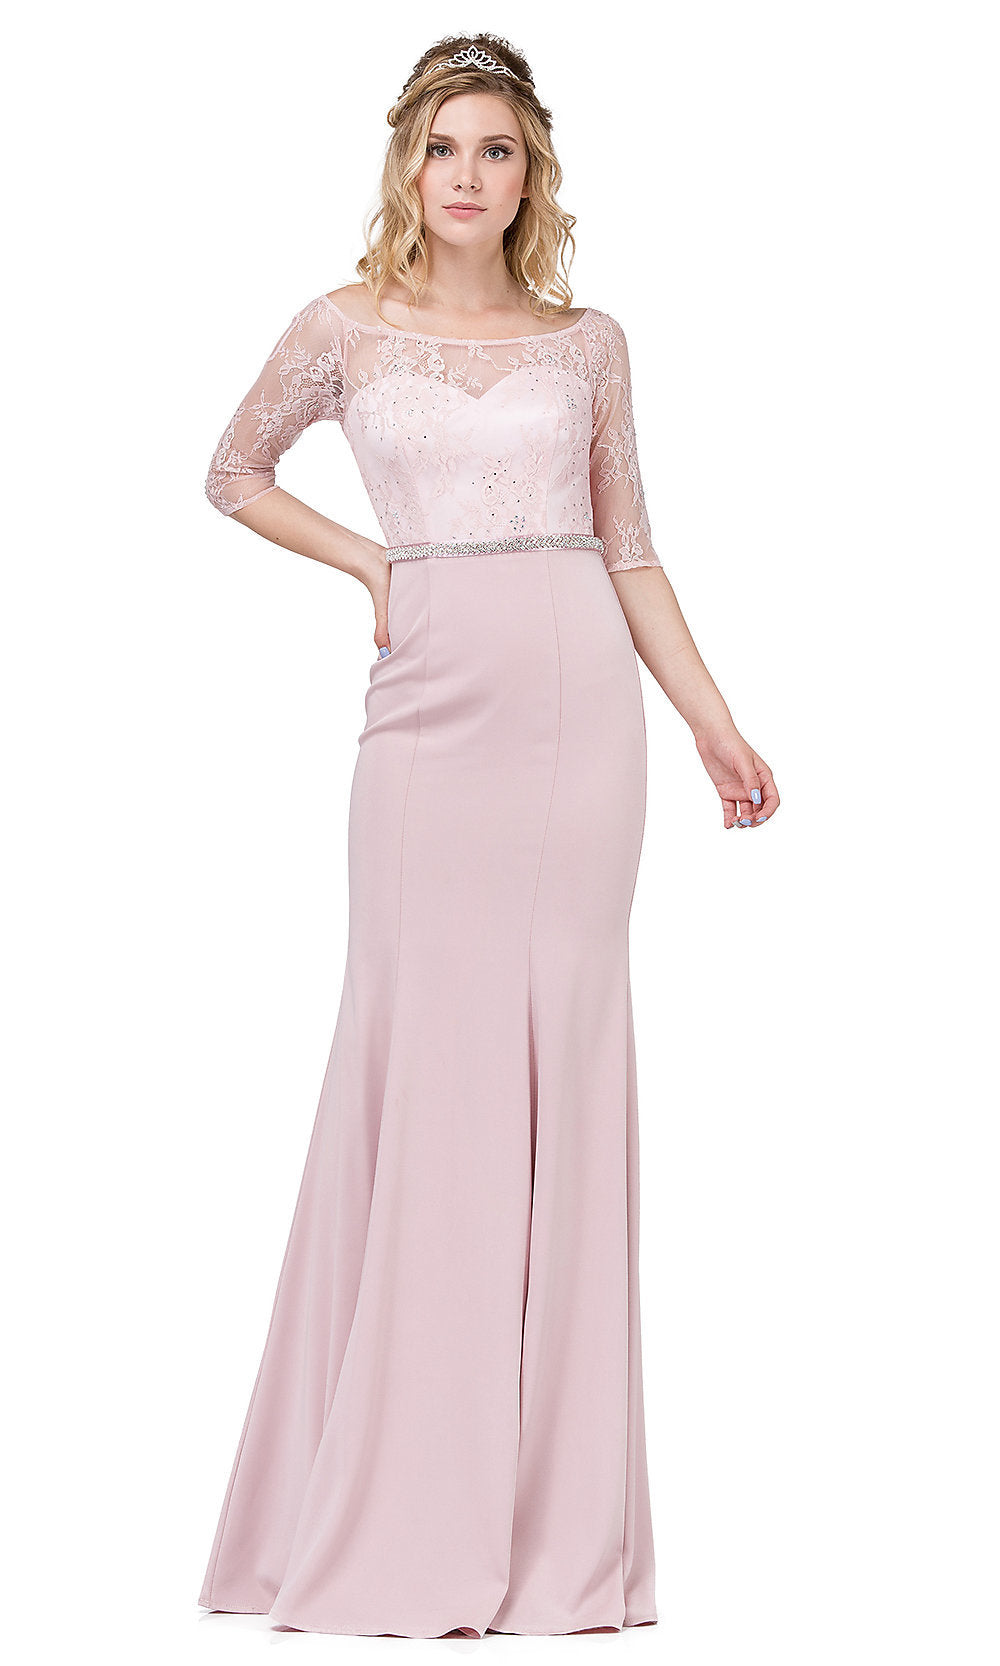 Dusty Pink Formal Dress with Sheer Lace Three-Quarter Sleeves